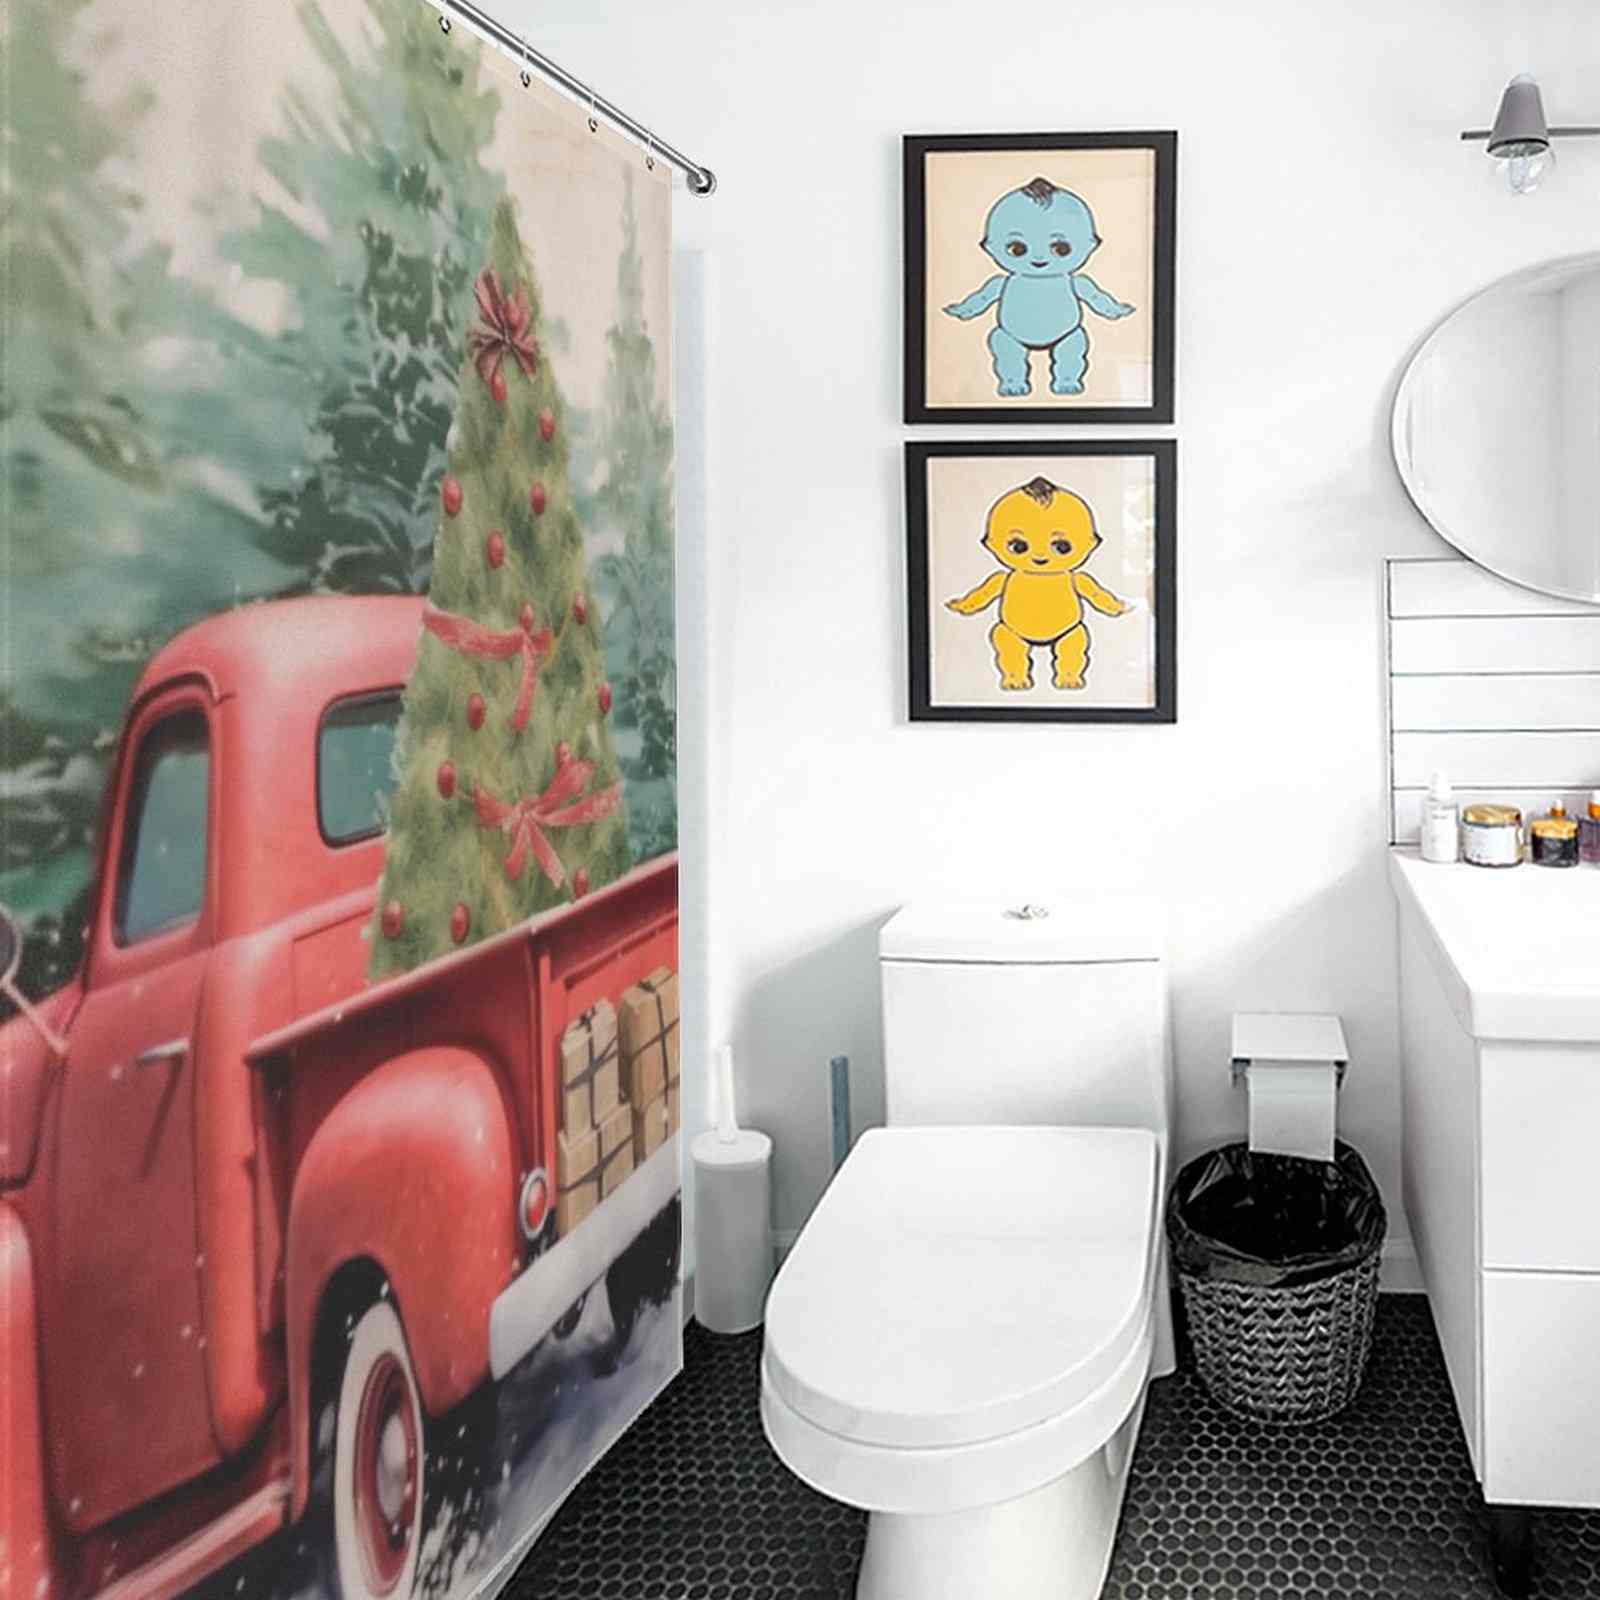 A bathroom with a red truck shower curtain.